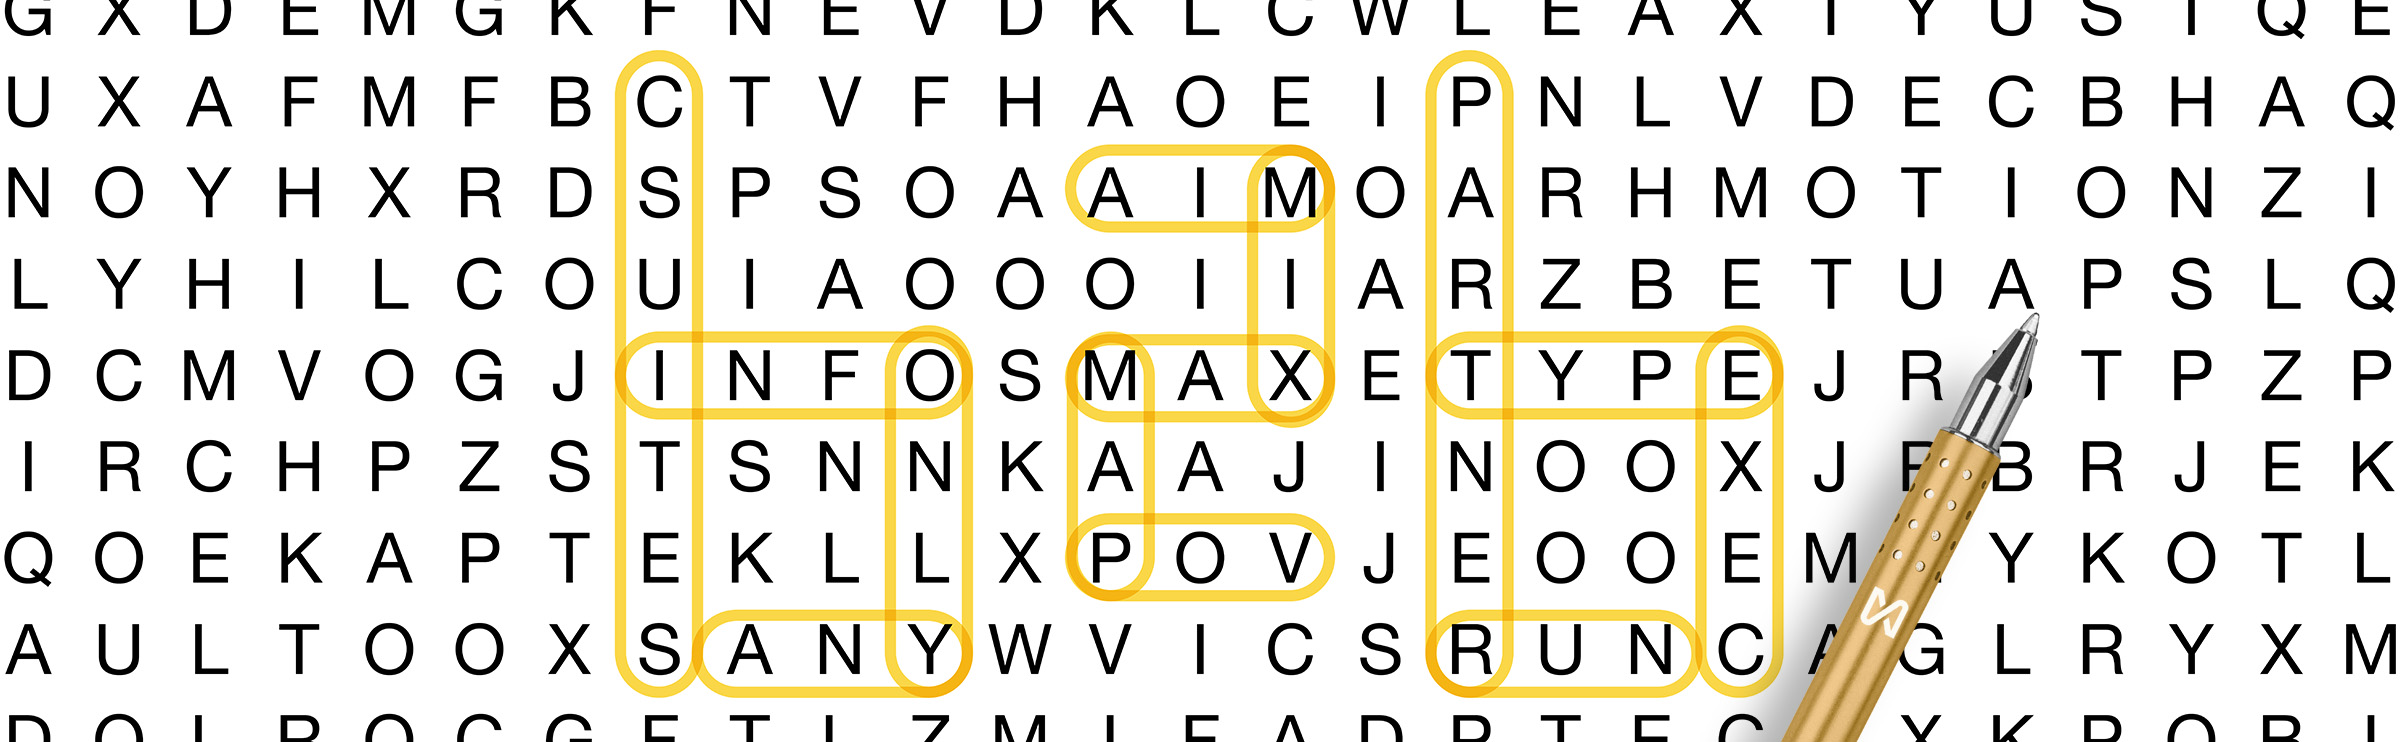 crossword puzzle with brand strategy words highlighting to make "B2B" in crossword